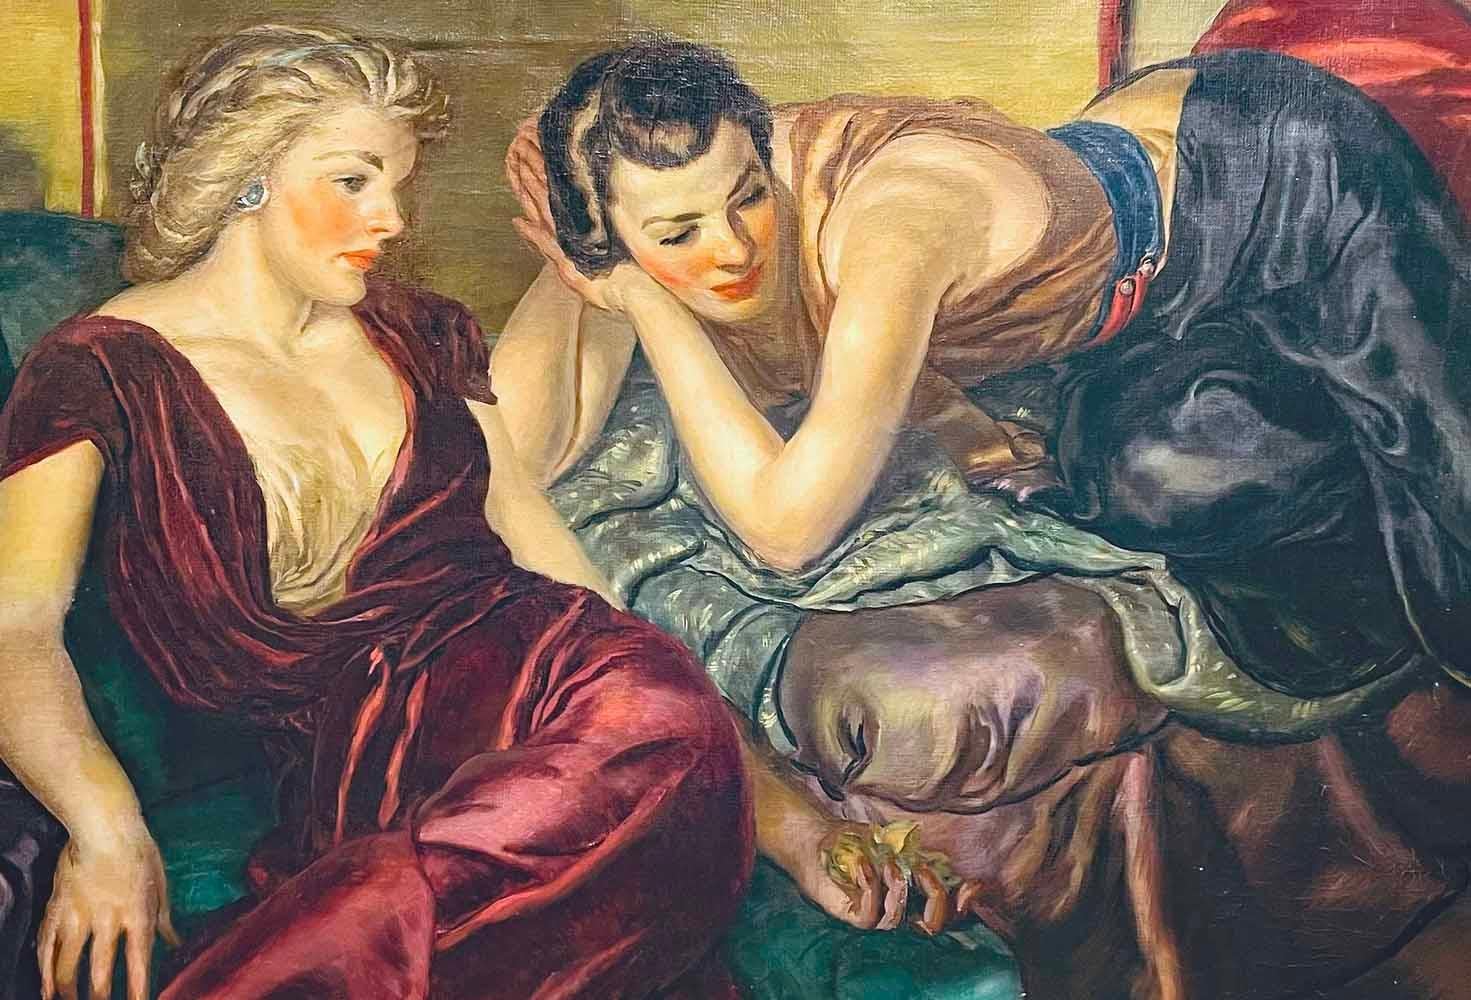 Voluptuous in its approach to scene and palette, this sumptuous portrait of two women, lounging side by side amongst pillows and fabrics in satin and silk, was painted by Rudolph Schabelitz.  It is not known who these women were, but they are